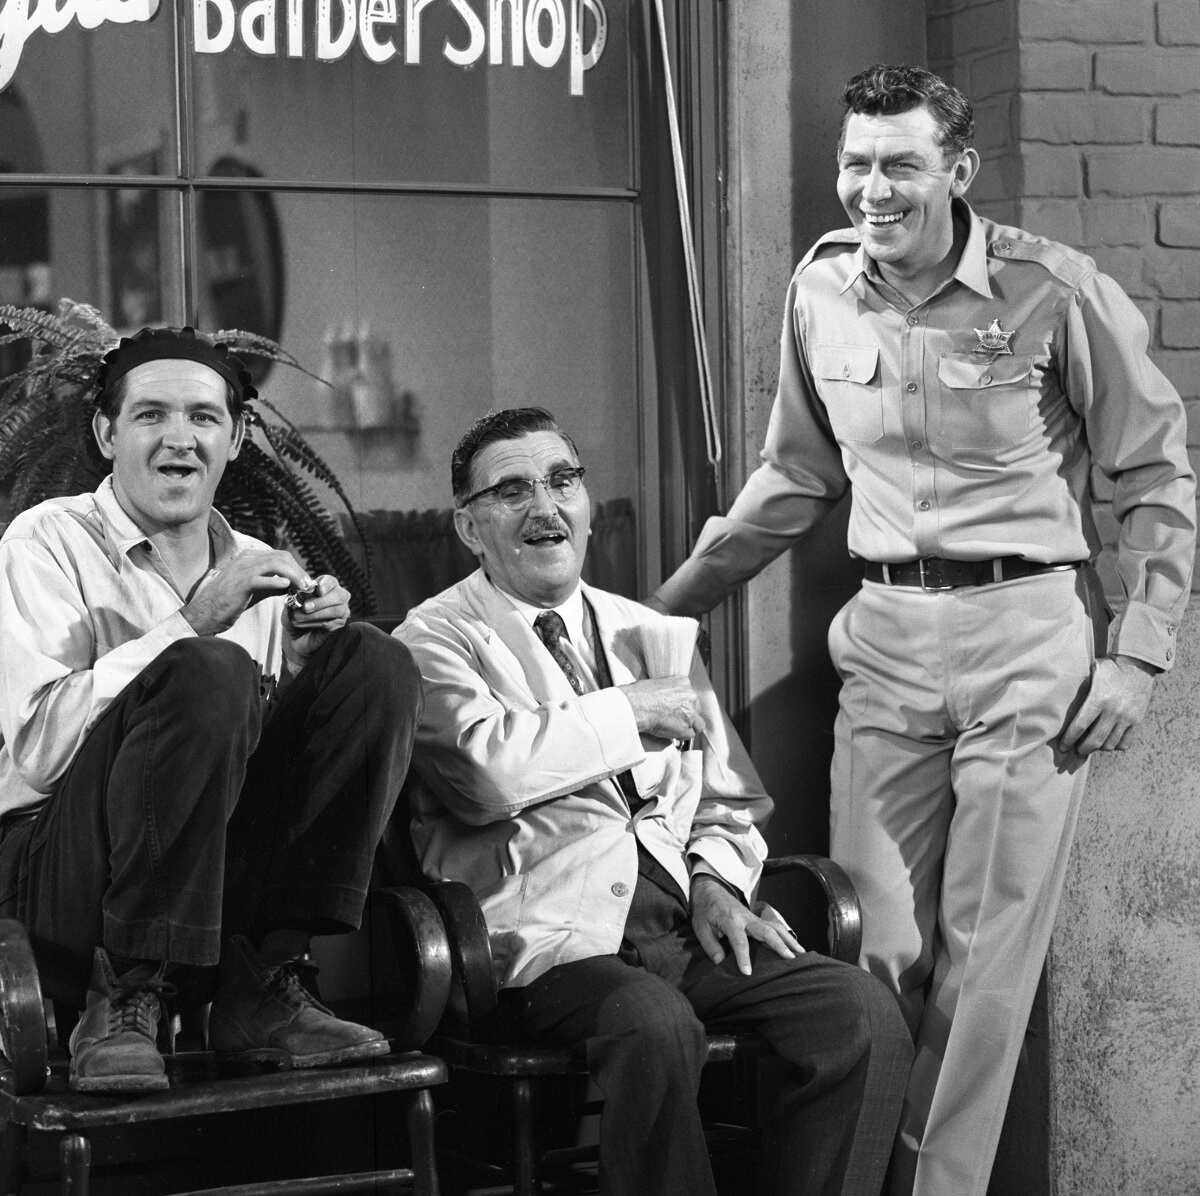 Goober Pyle, Floyd Lawson and Andy Taylor sit together outside of the barber shop in an episode of 'The Andy Griffith Show' Goober was given a spinoff that ultimately failed after just one episode.